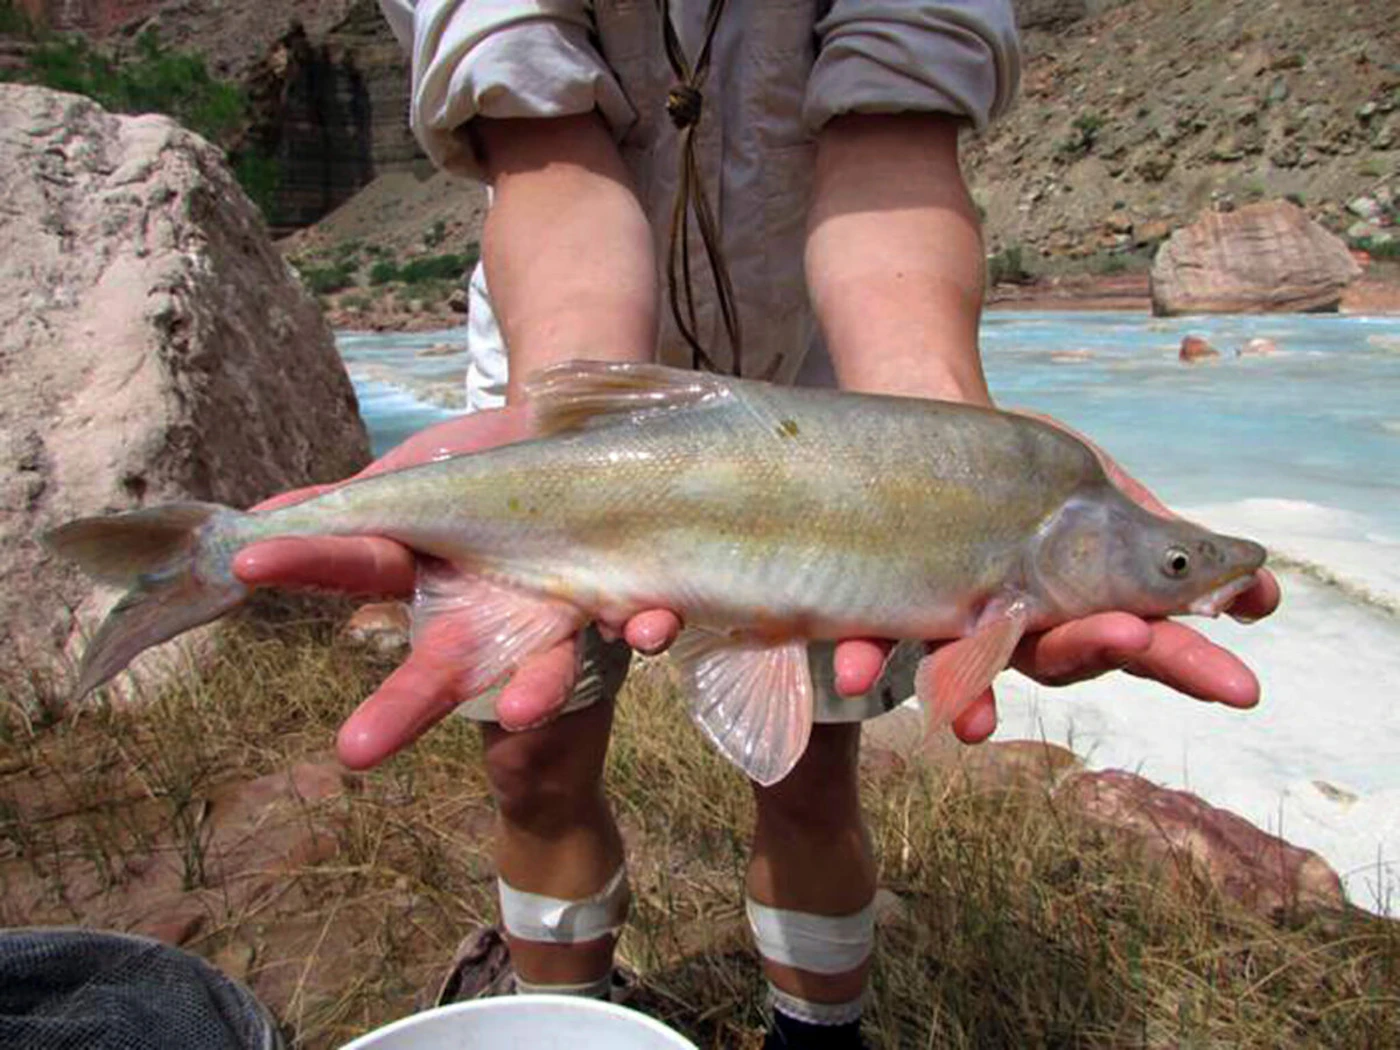 FILE - This undated photo provided by the US Fish and Wildlife Service shows a humpback chub in the Colorado River basin in Grand Canyon National Park in Arizona. The National Park Service will renew efforts to rid an area of the Colorado River in northern Arizona of invasive fish by killing them with a chemical treatment, the agency said Friday, Aug. 18, 2023. It’s the latest tactic in an ongoing struggle to keep non-native smallmouth bass and green sunfish at bay below the Glen Canyon Dam and to protect a threatened native fish, the humpback chub. (Travis Francis/US Fish and Wildlife Service via AP, File)